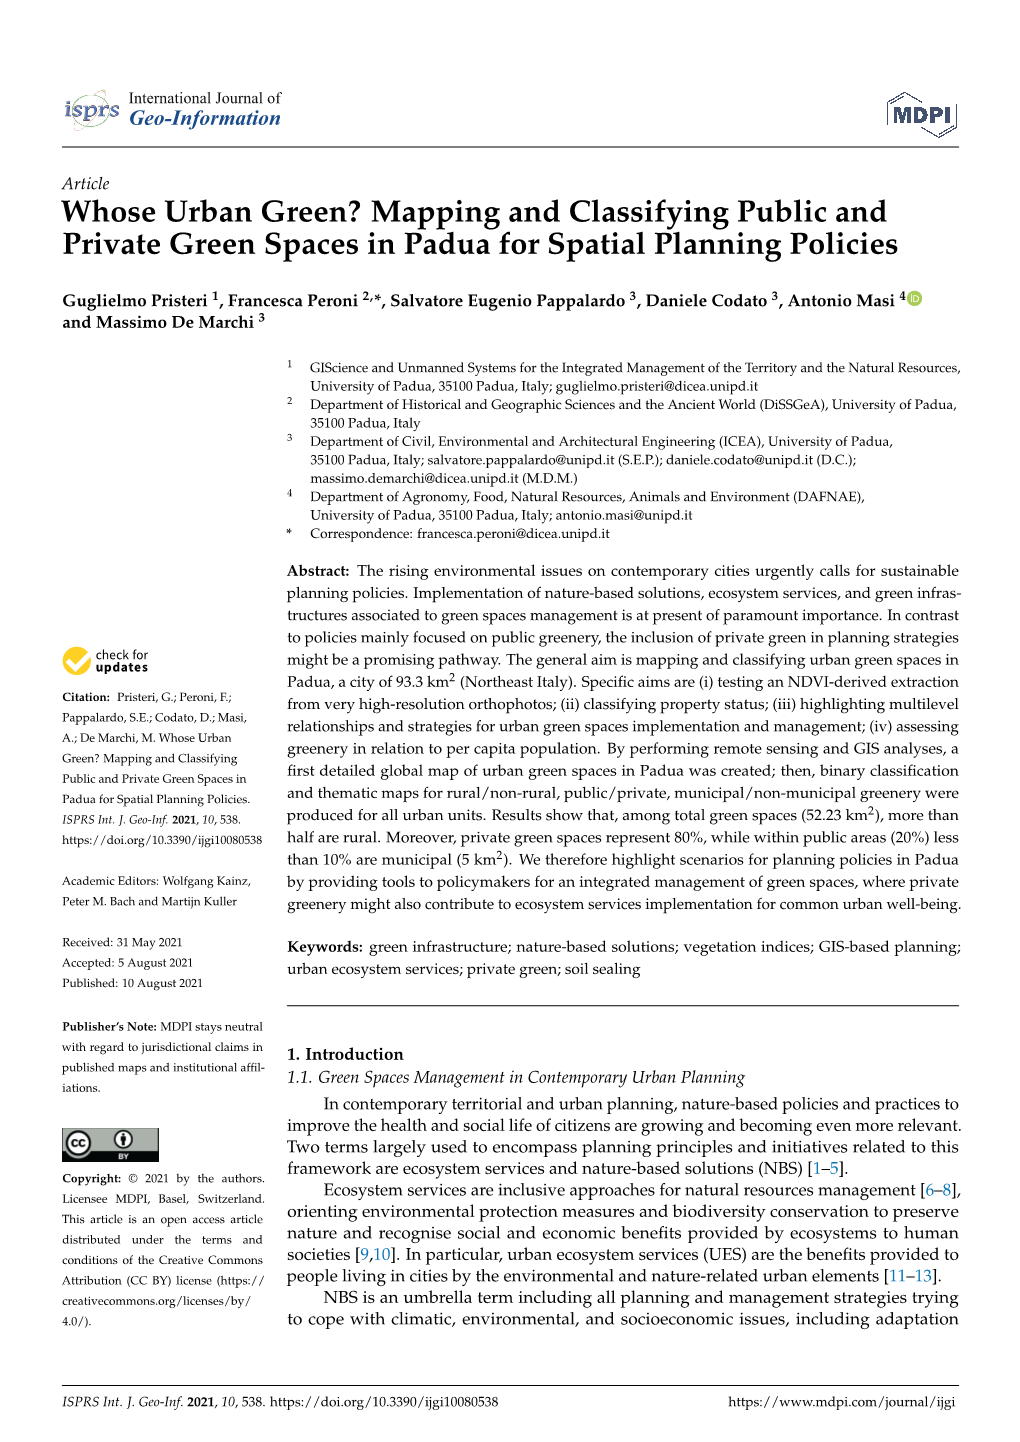 Whose Urban Green? Mapping and Classifying Public and Private Green Spaces in Padua for Spatial Planning Policies